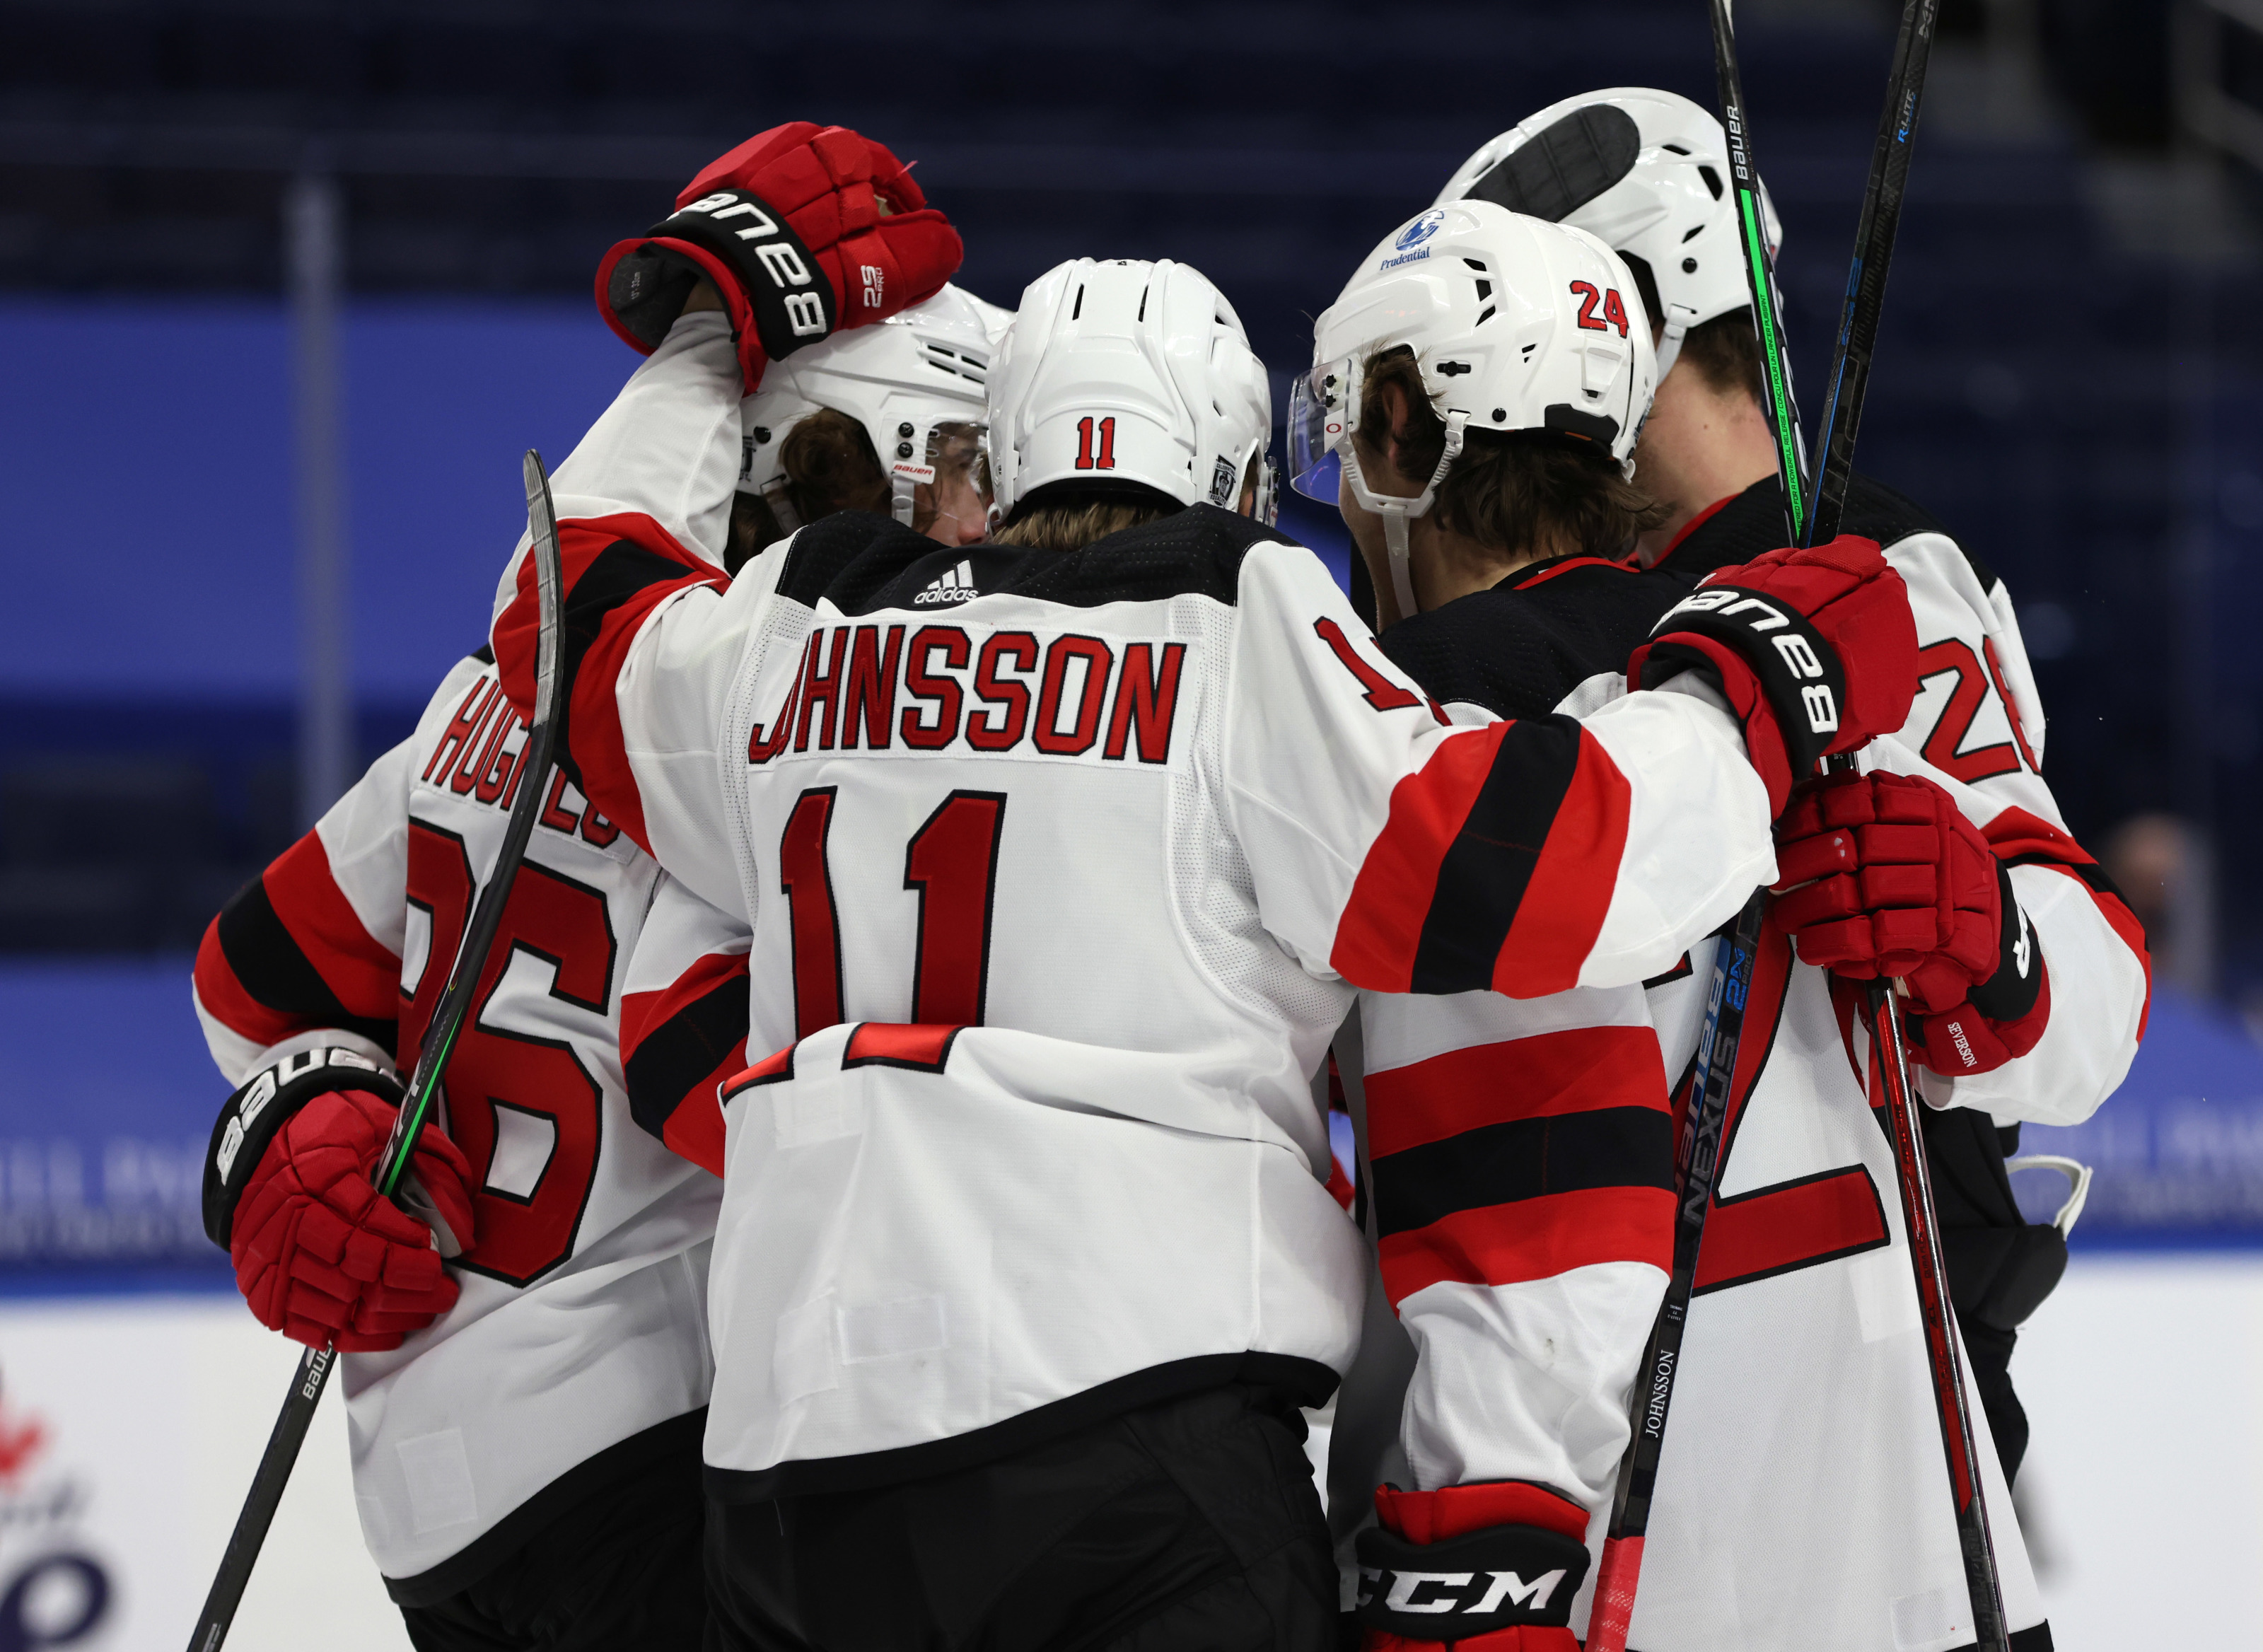 A Very Early Look at the 2021 New Jersey Devils Future Free